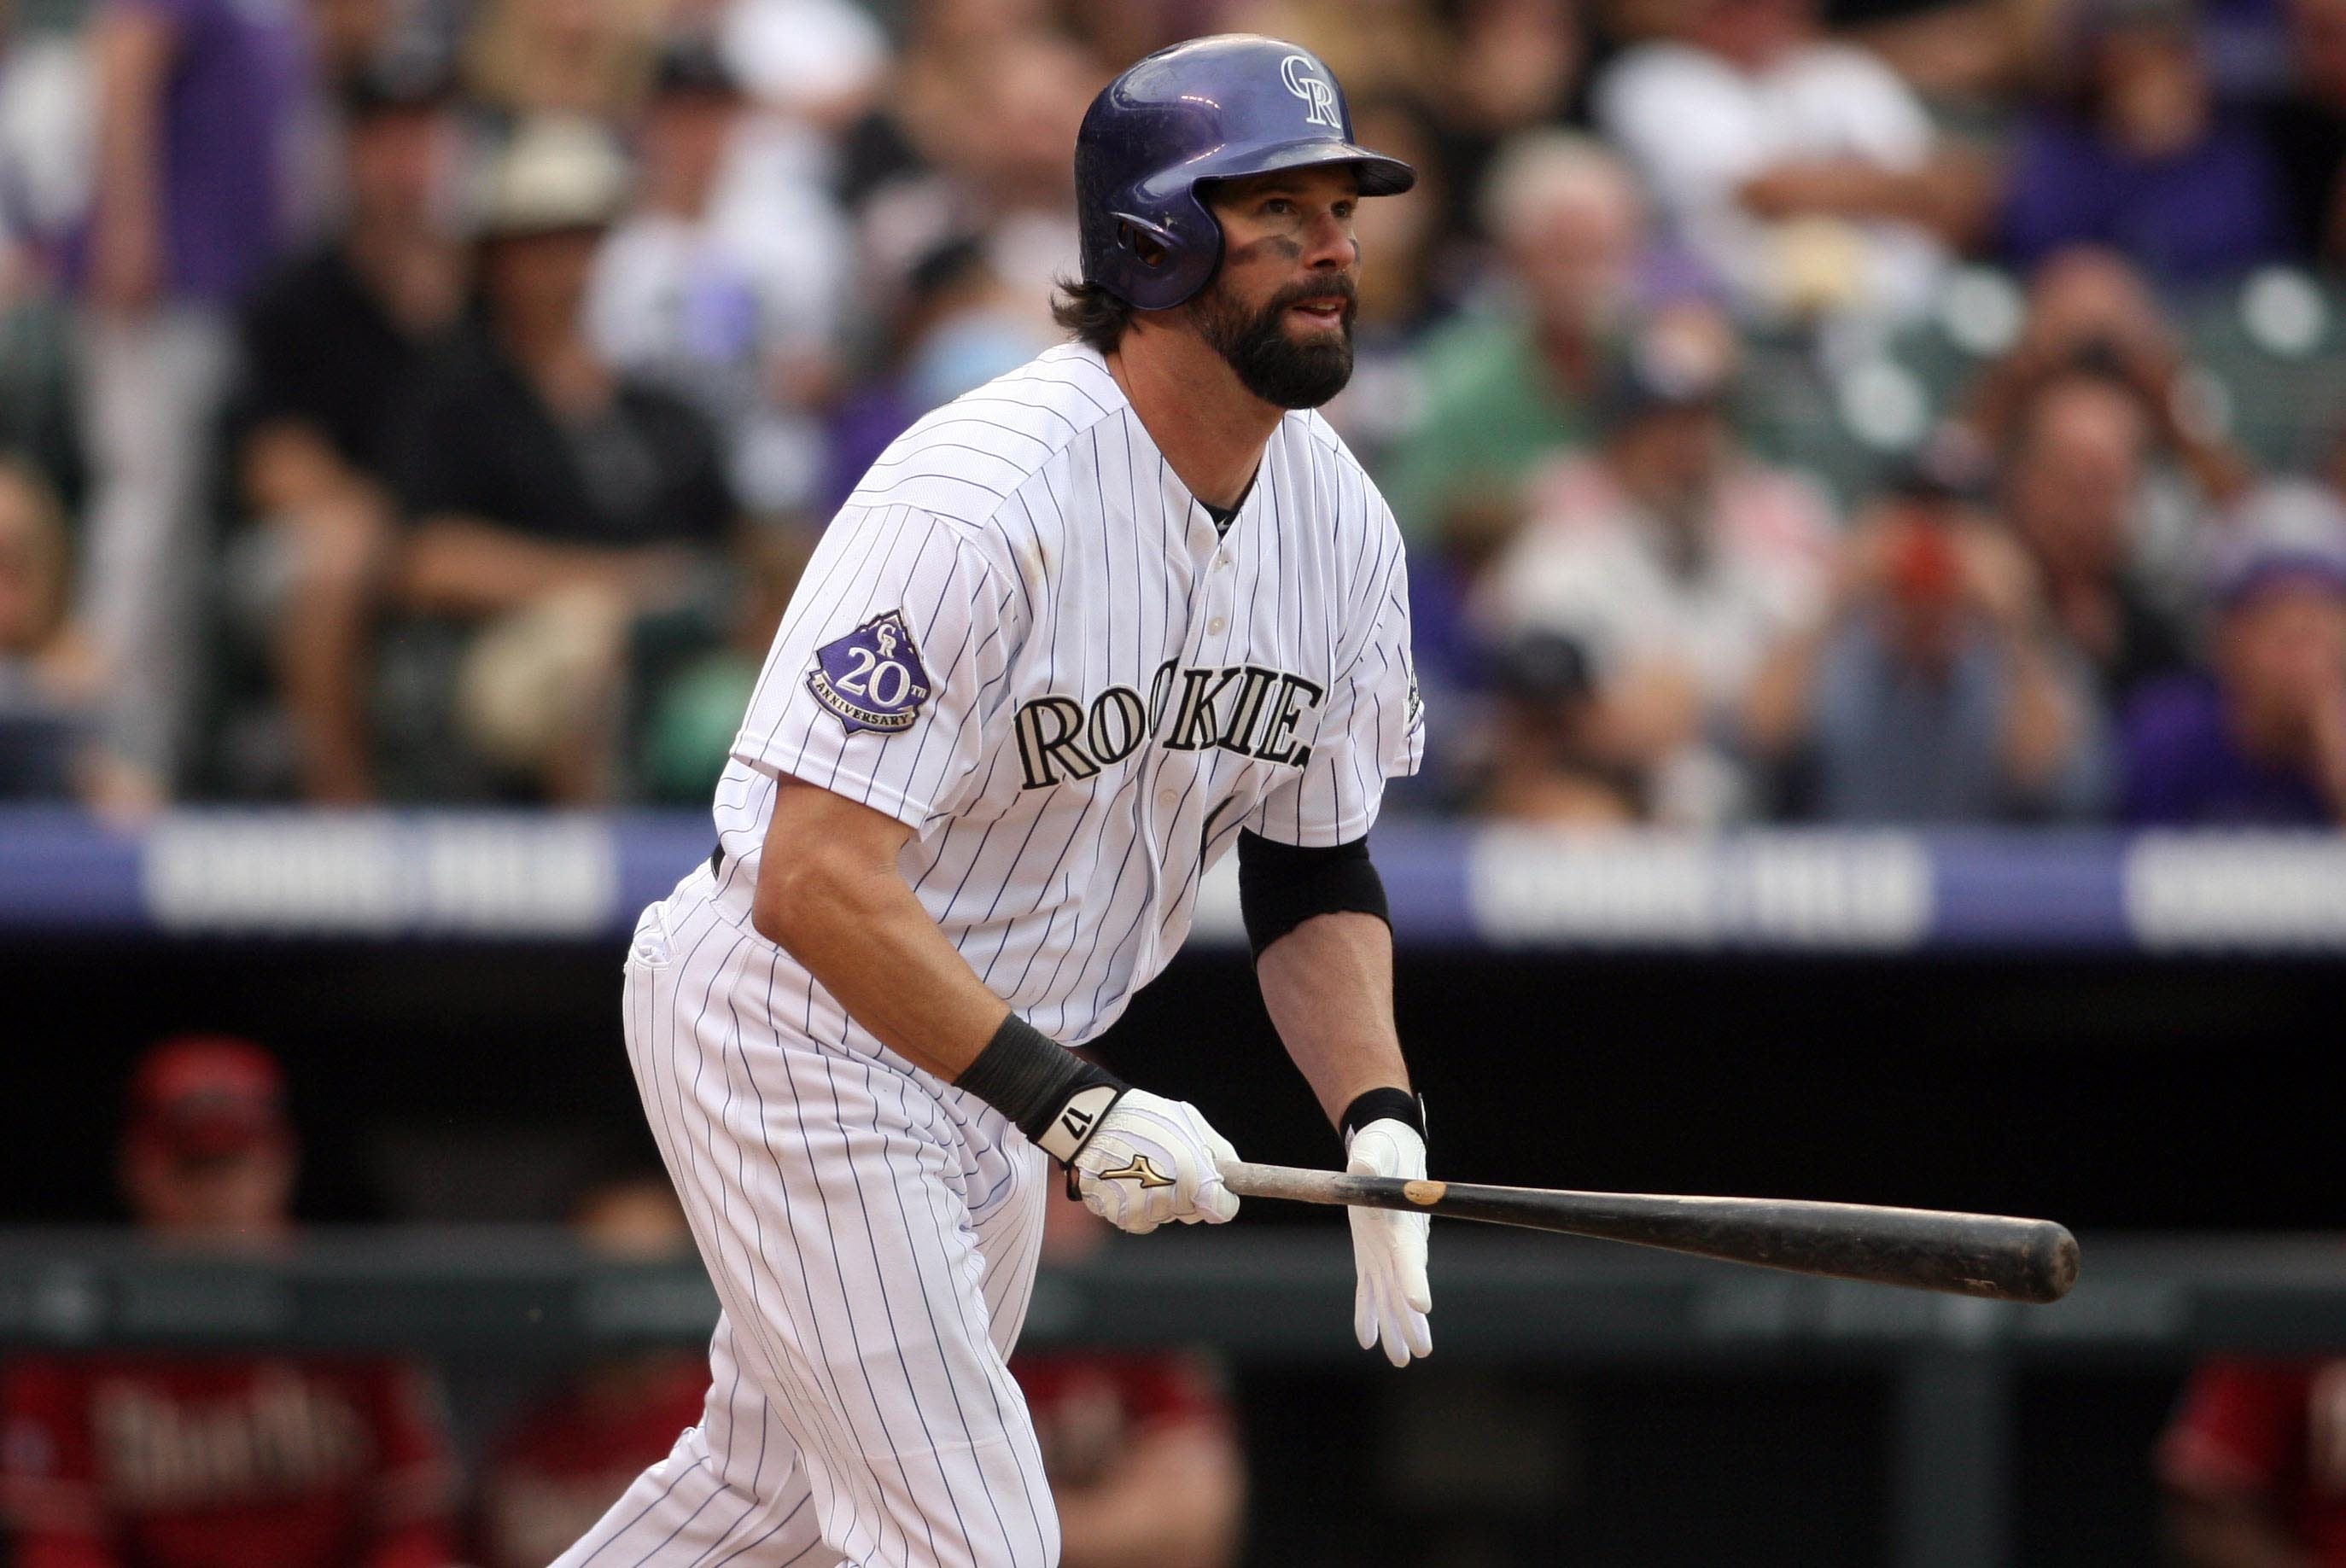 See: Todd Helton Baseball Hall of Fame plaque unveiled during induction ceremony